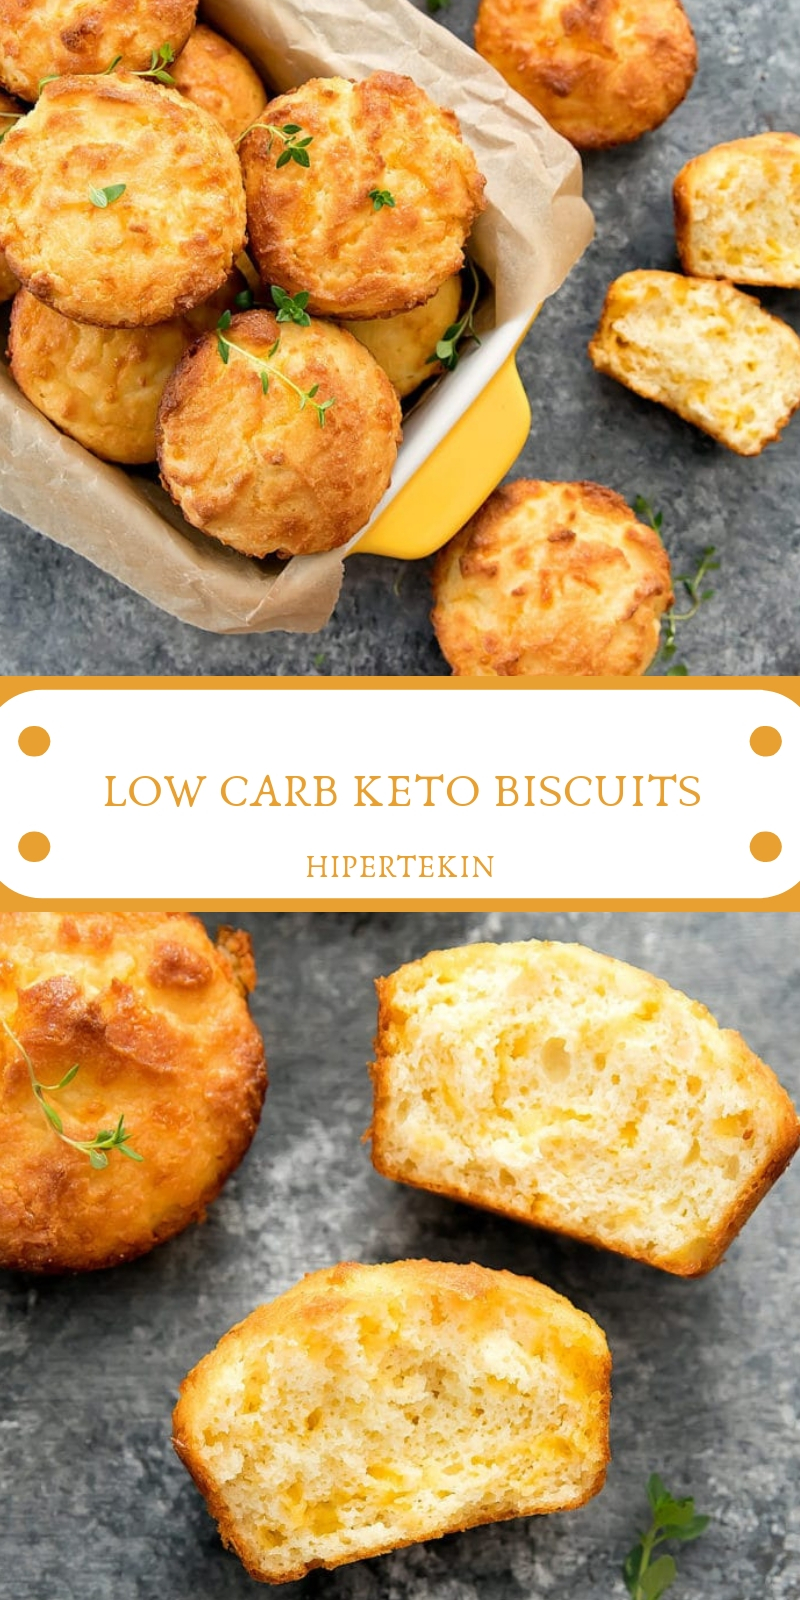 LOW CARB KETO BISCUITS